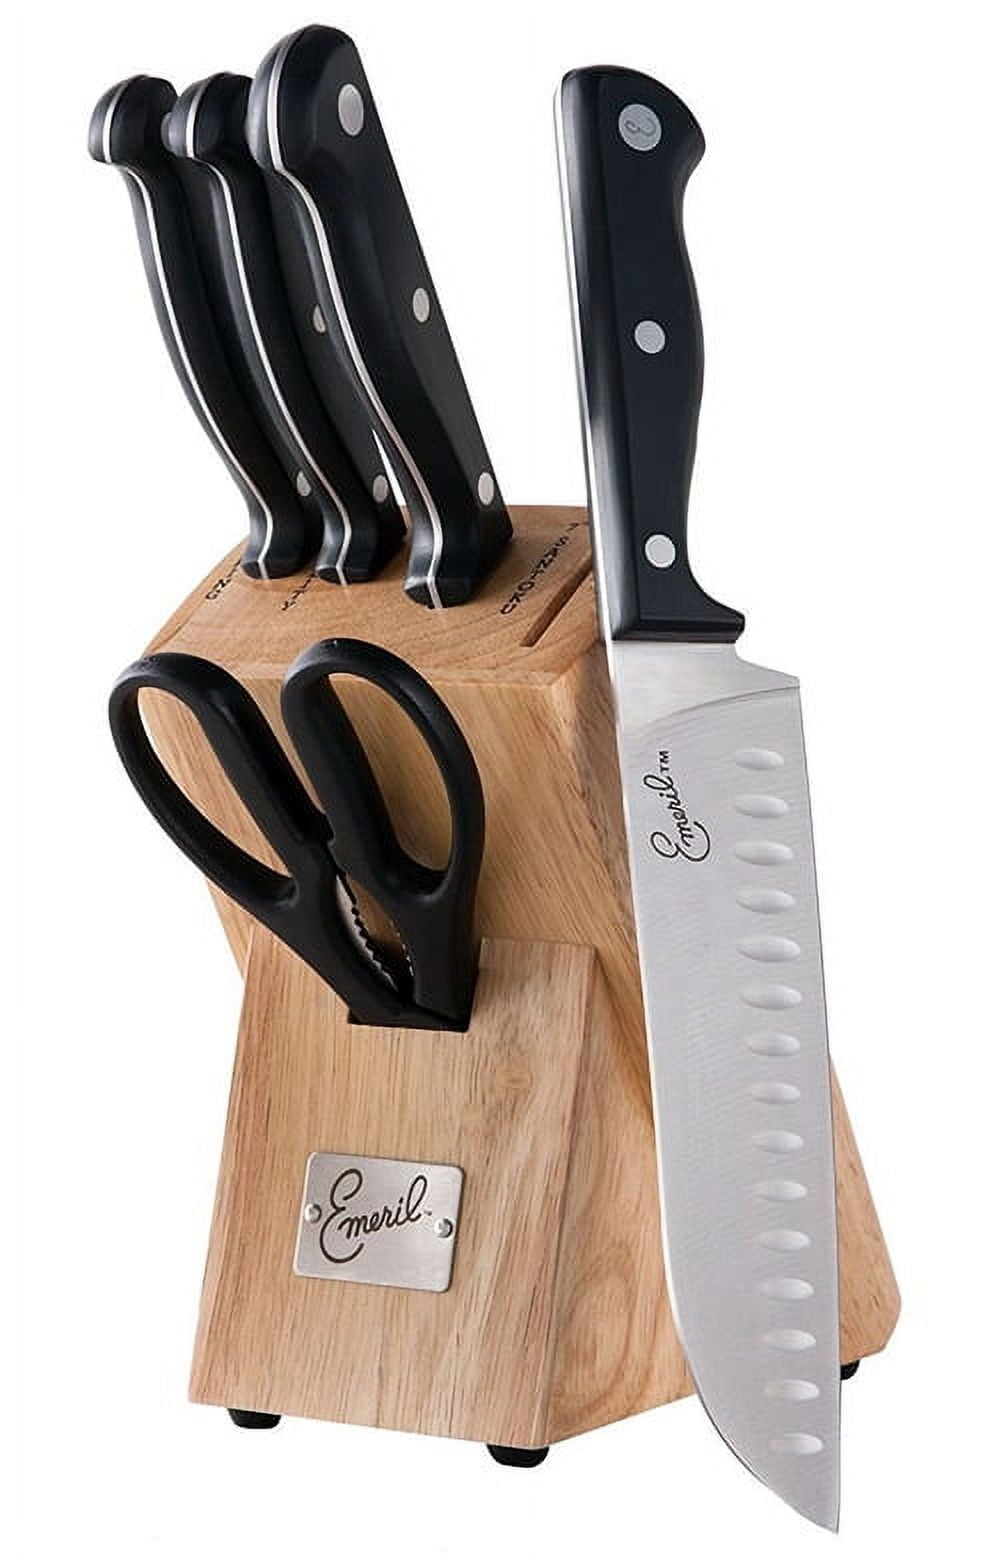 Emeril Lagasse 6-Piece Stamped Stainless Steel Kitchen Knife Set